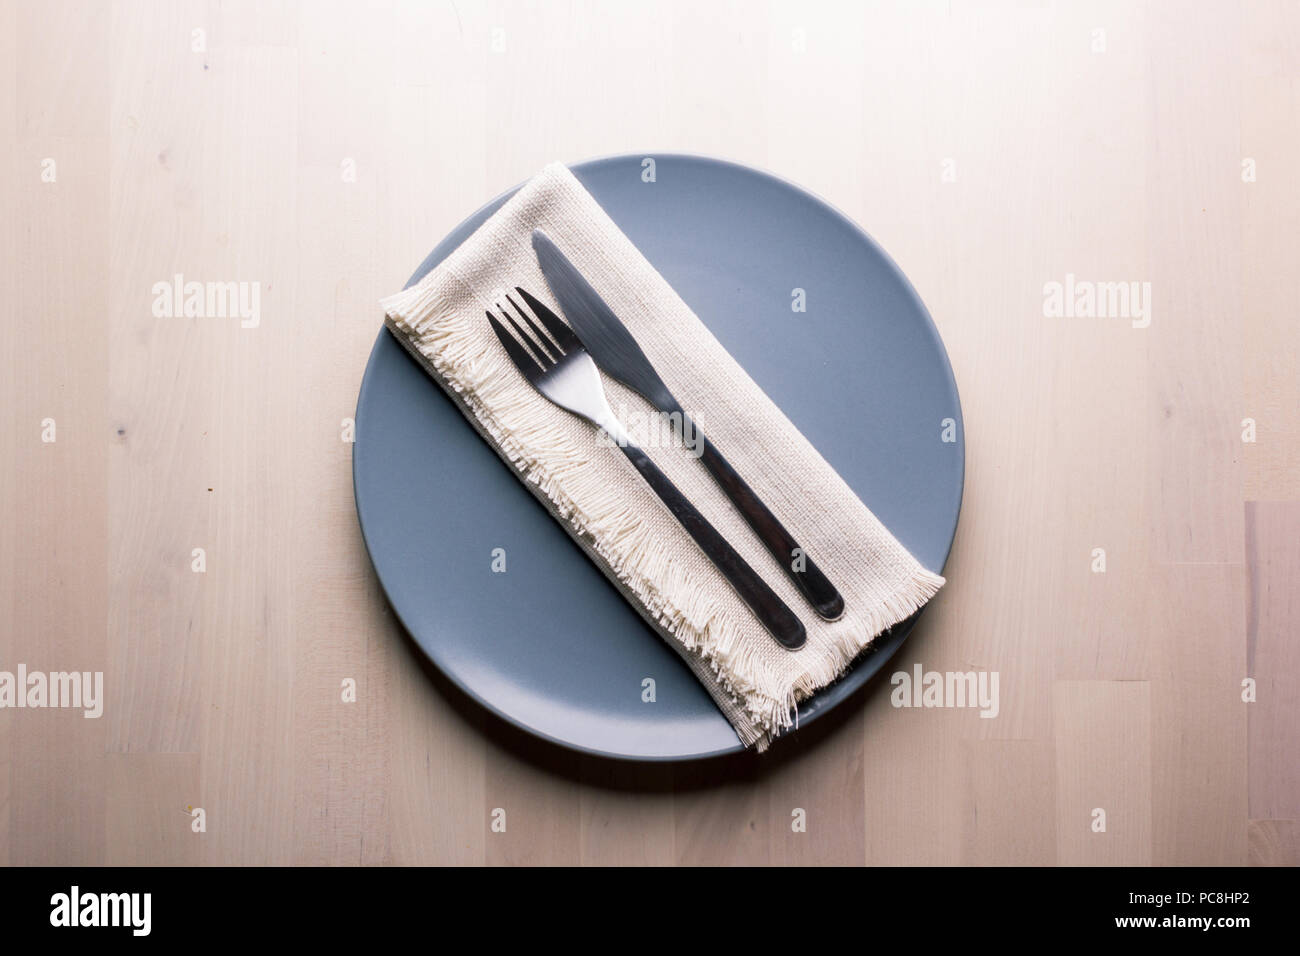 Top view of a restaurant table with plate, knife and fork, restaurant concept Stock Photo